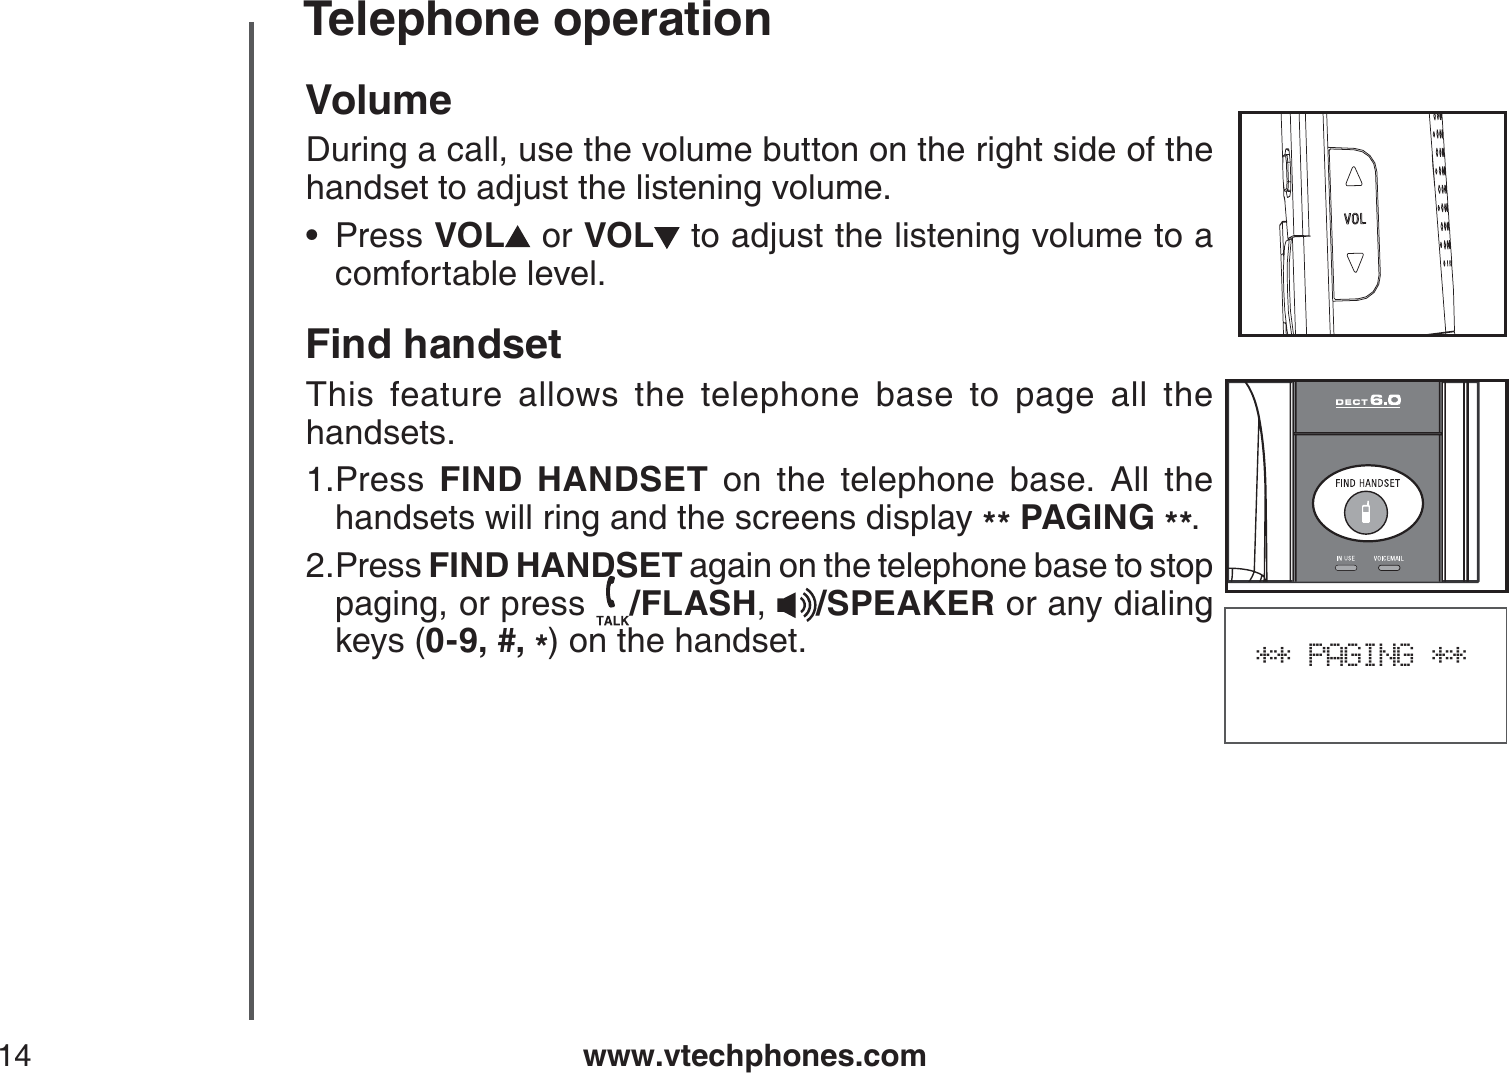 www.vtechphones.com14Telephone operation** PAGING **VolumeDuring a call, use the volume button on the right side of the handset to adjust the listening volume.Press VOL  or VOL  to adjust the listening volume to a comfortable level.Find handsetThis feature allows the telephone base to page all the handsets.Press  FIND HANDSET on the telephone base. All the handsets will ring and the screens display ** PAGING **.Press FIND HANDSET again on the telephone base to stop paging, or press  /FLASH,/SPEAKER or any dialing keys (0-9, #, *) on the handset.•1.2.